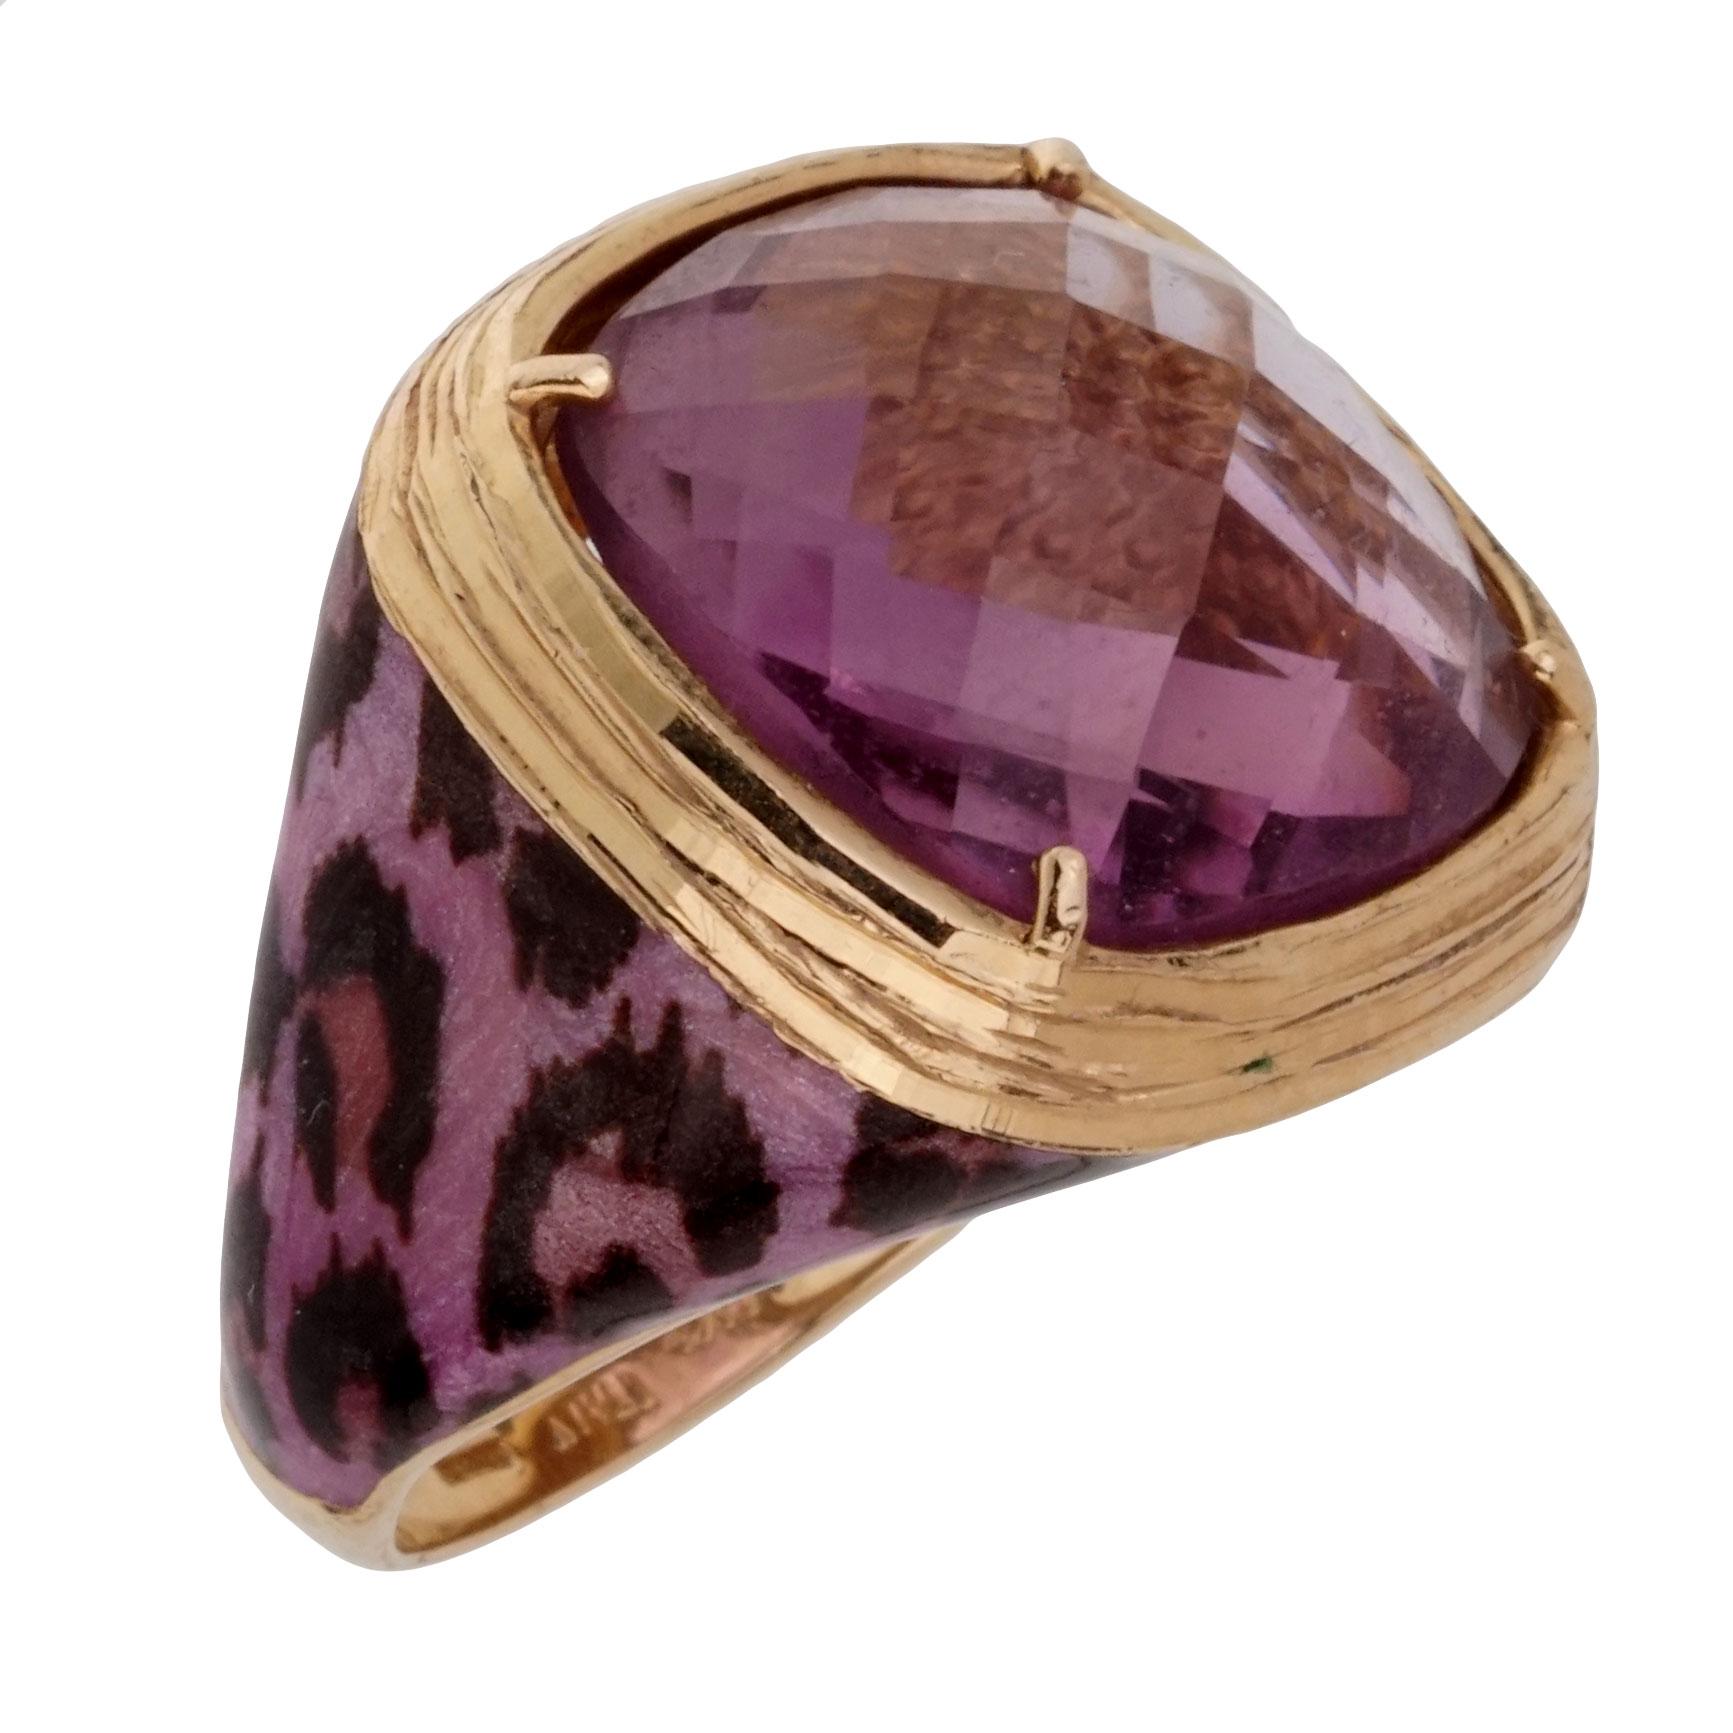 A fabulous cocktail ring showcasing a stepcut Amethyst stone surrounded by incredible enamel work in the form of a cheetah spots in 14k yellow gold.

Size 6 1/4 Resizeable